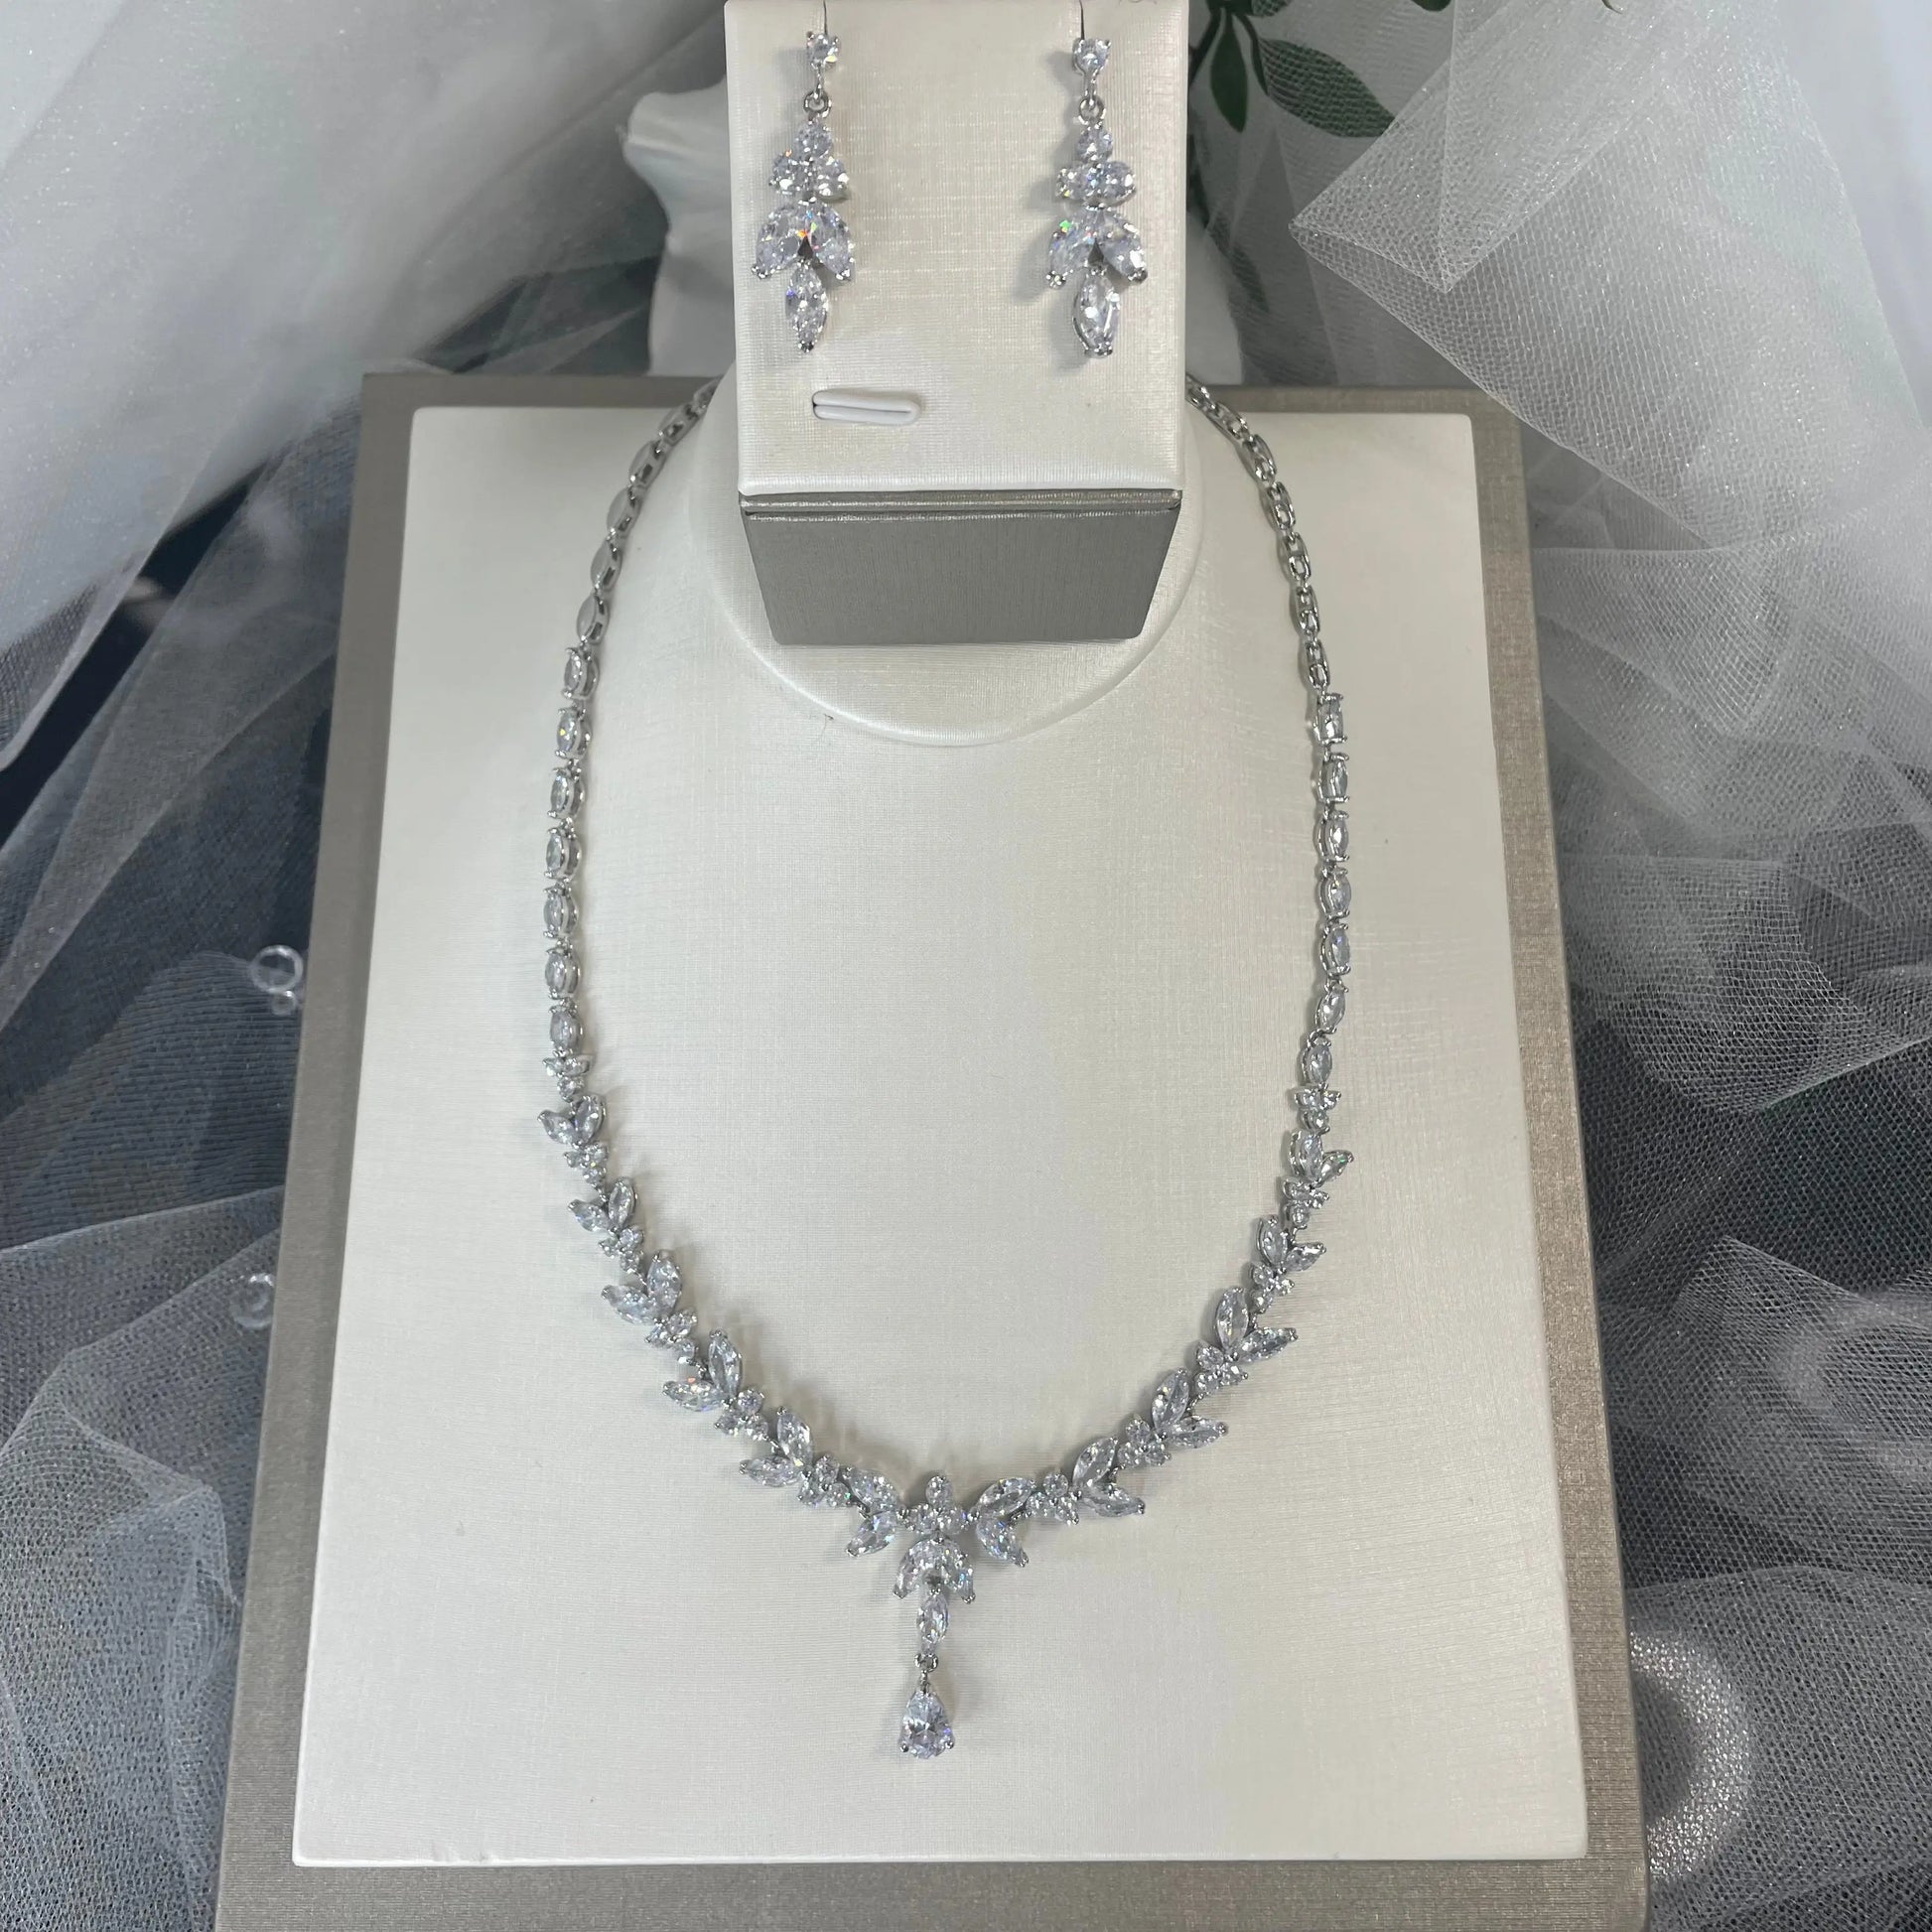 Silver Necklace and Earrings: A beautiful silver necklace and earrings set featuring leaf and flower designs with clear cubic zirconia.